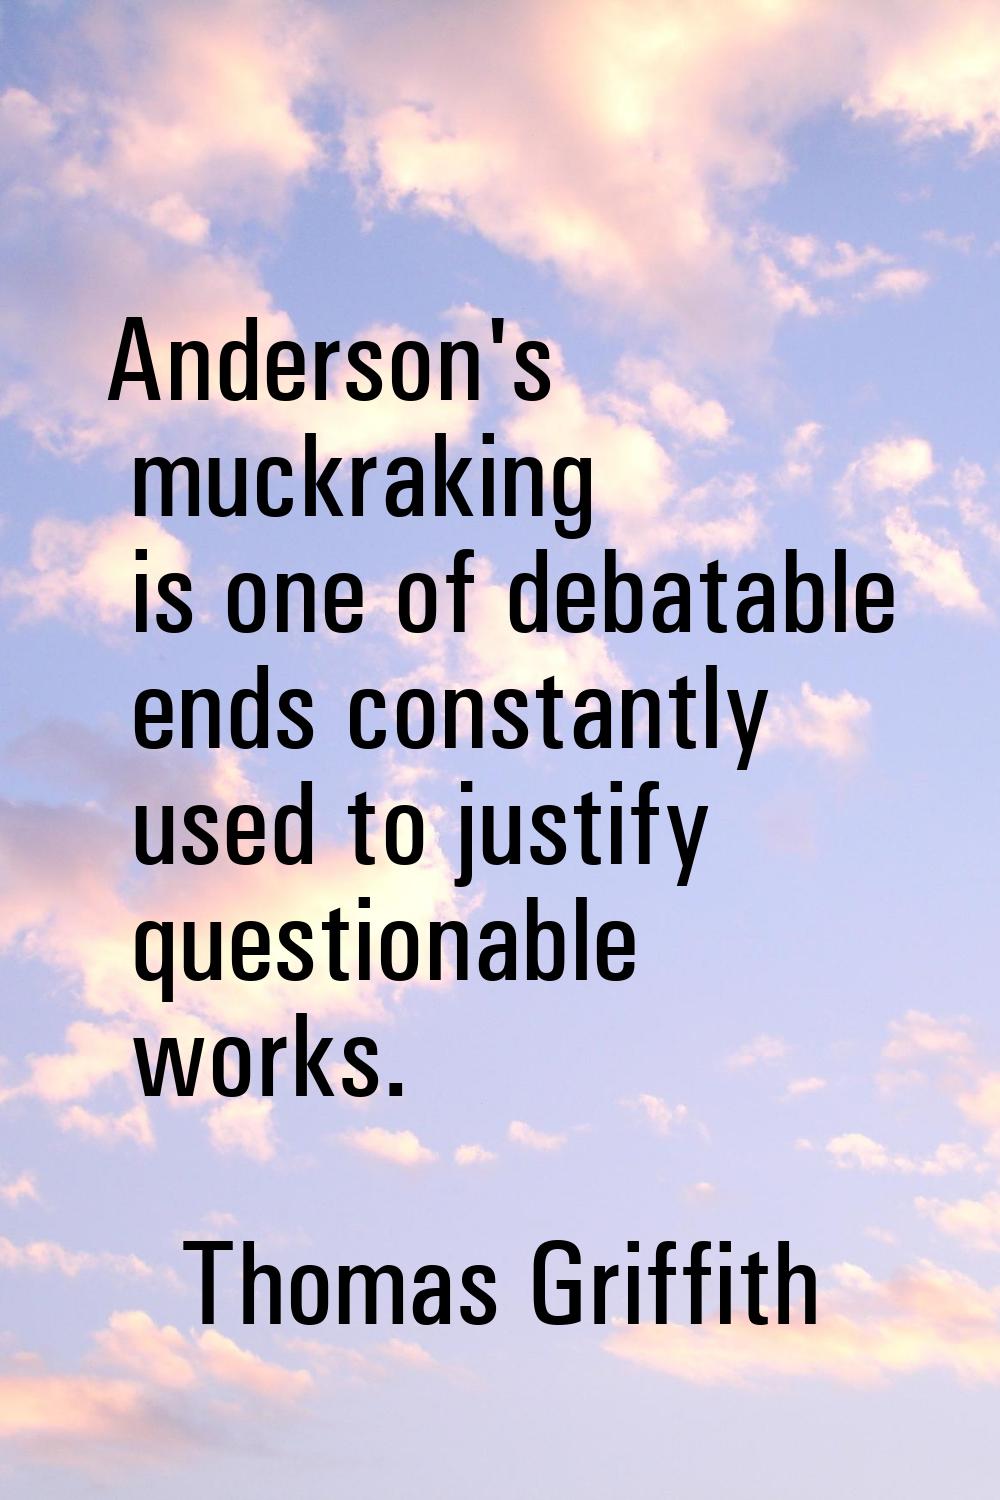 Anderson's muckraking is one of debatable ends constantly used to justify questionable works.